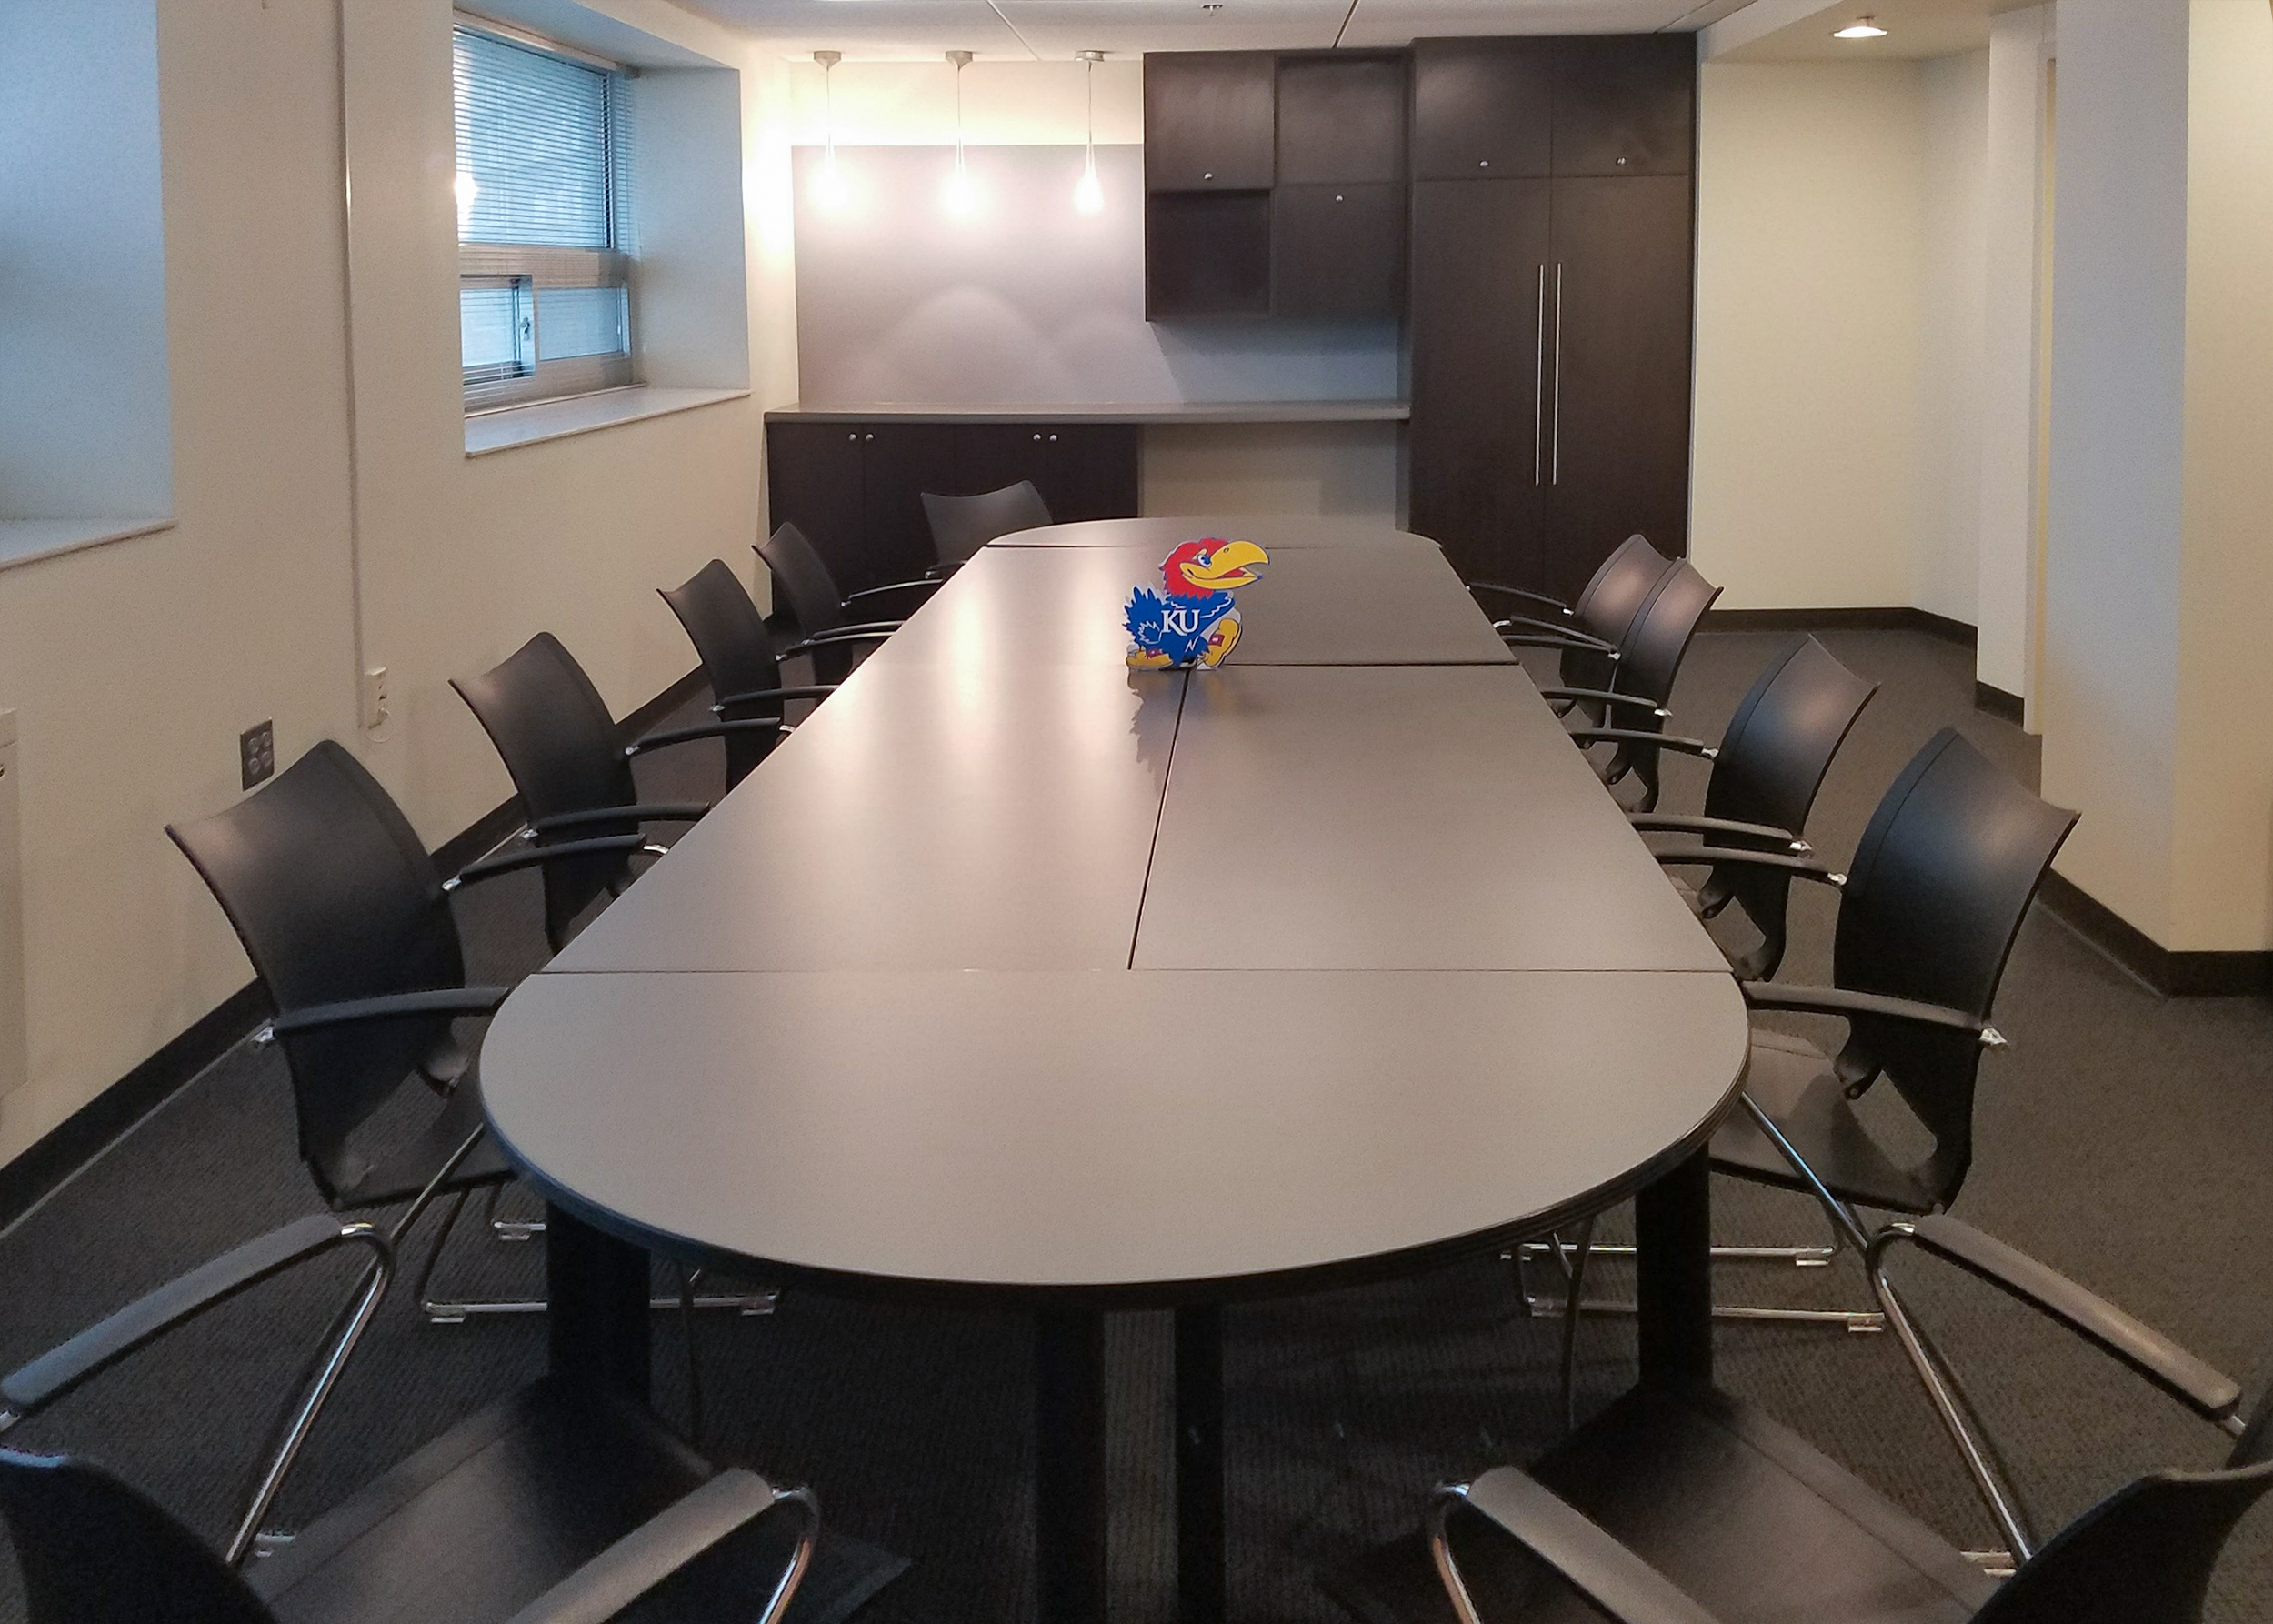 Hashinger Conference Room 332 with 12 chairs and a table